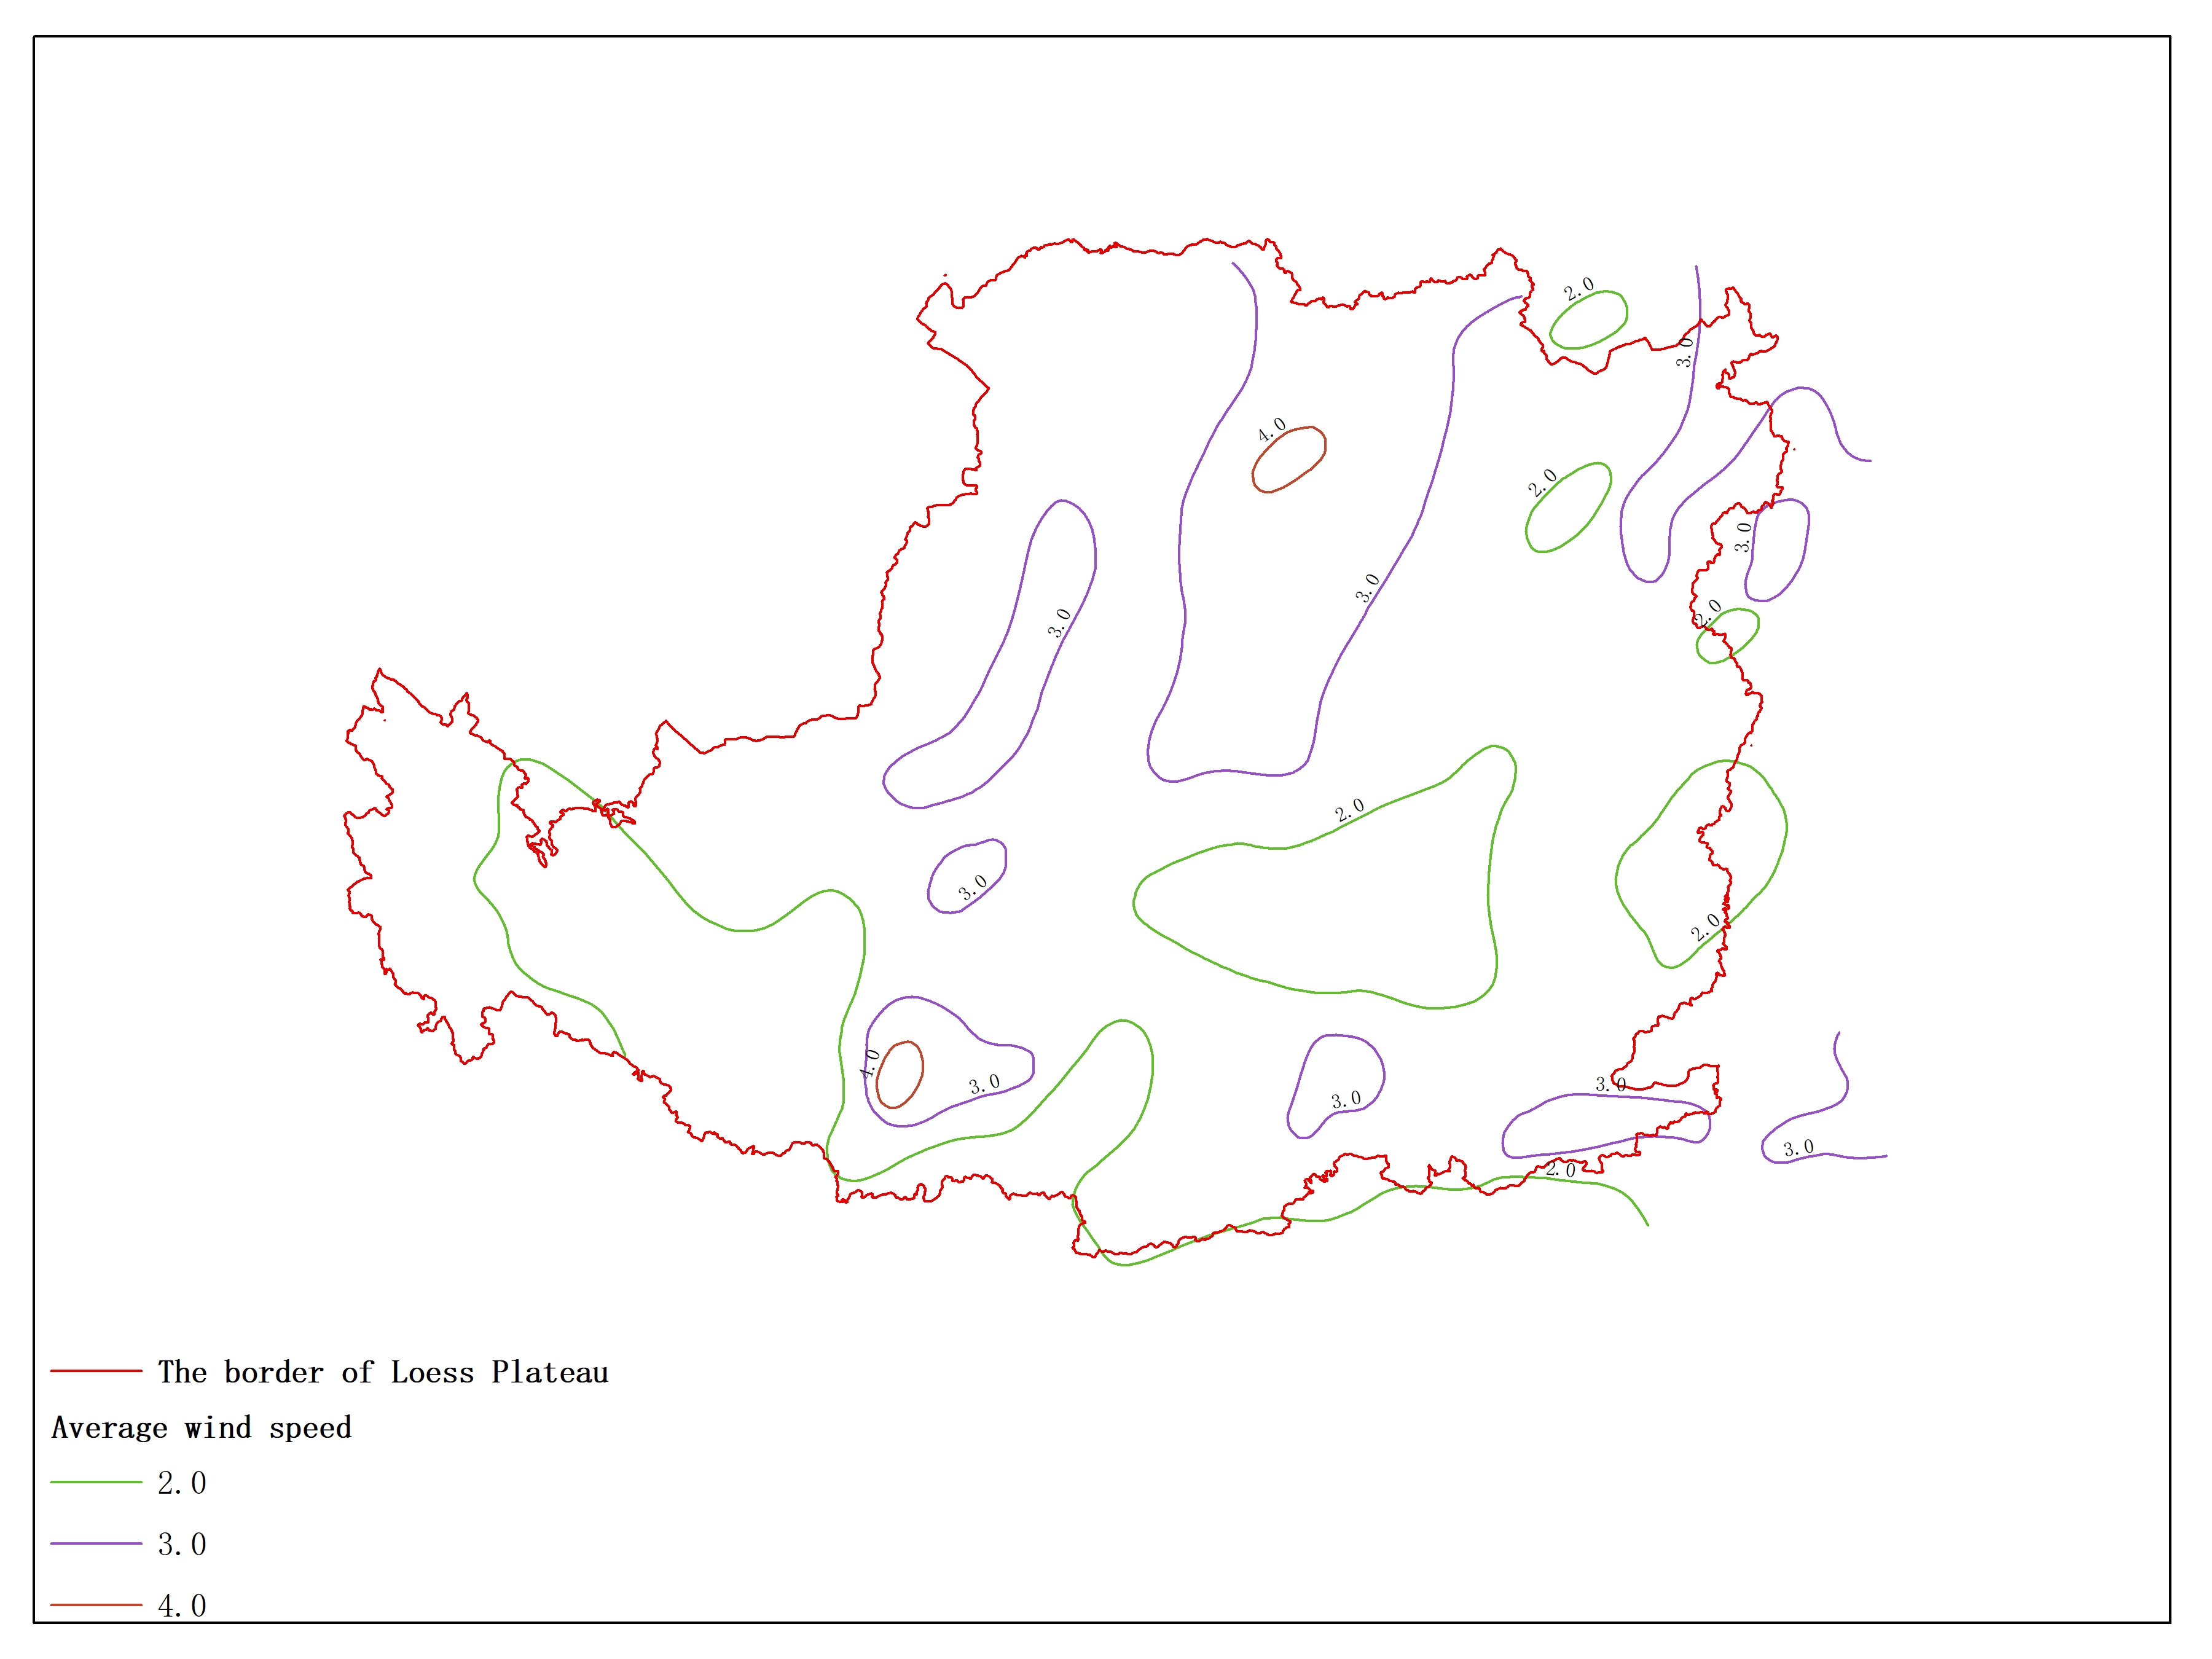 Agricultural climate resource atlas of Loess Plateau-Average wind speed